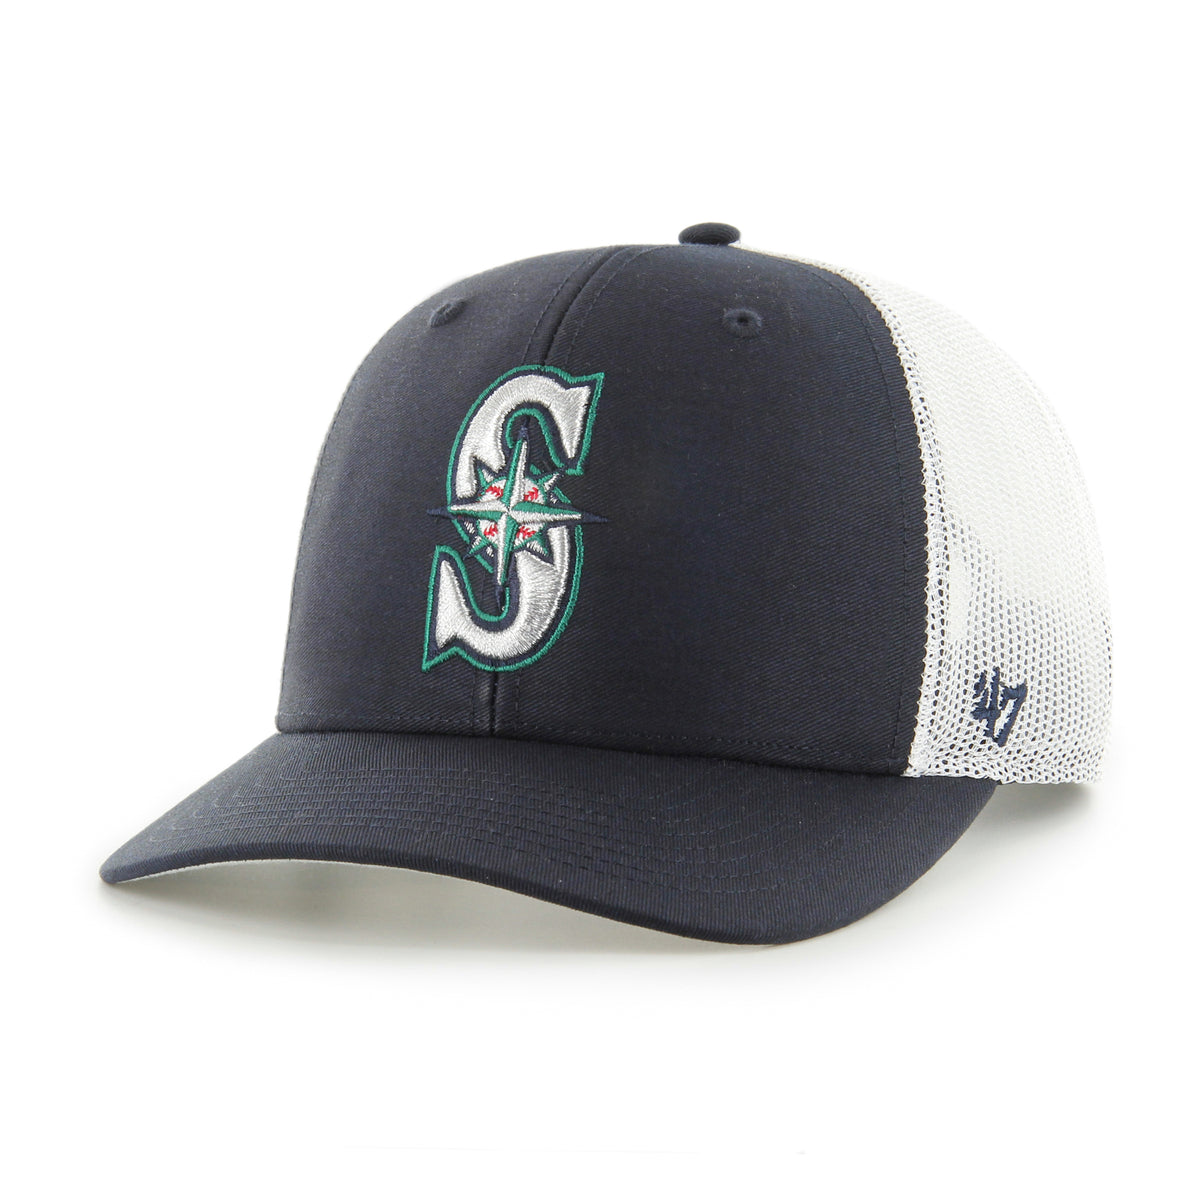 SEATTLE MARINERS COOP ASG SURE SHOT '47 TRUCKER